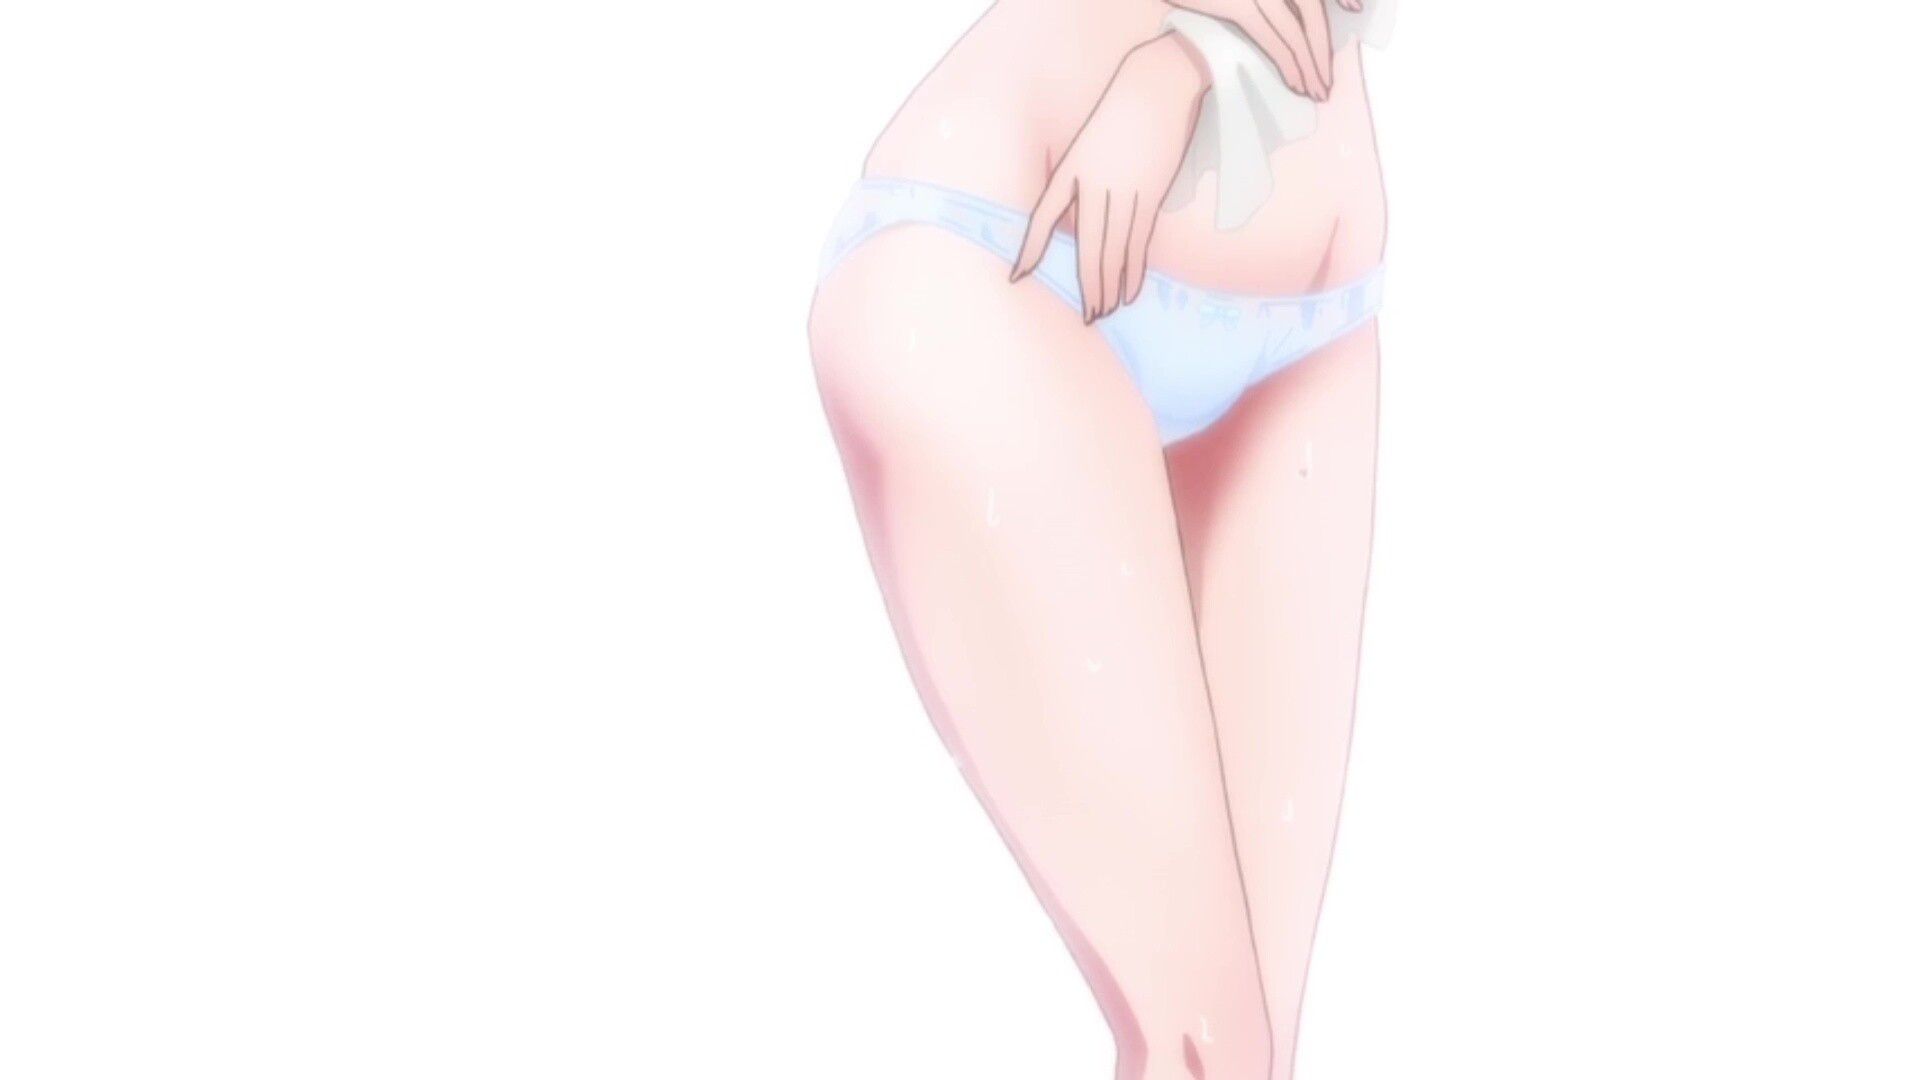 In episode 9 of the anime "Tomodachi Game", an erotic scene in which pants and bra are transparent in the depiction of underwear that is too erotic 14